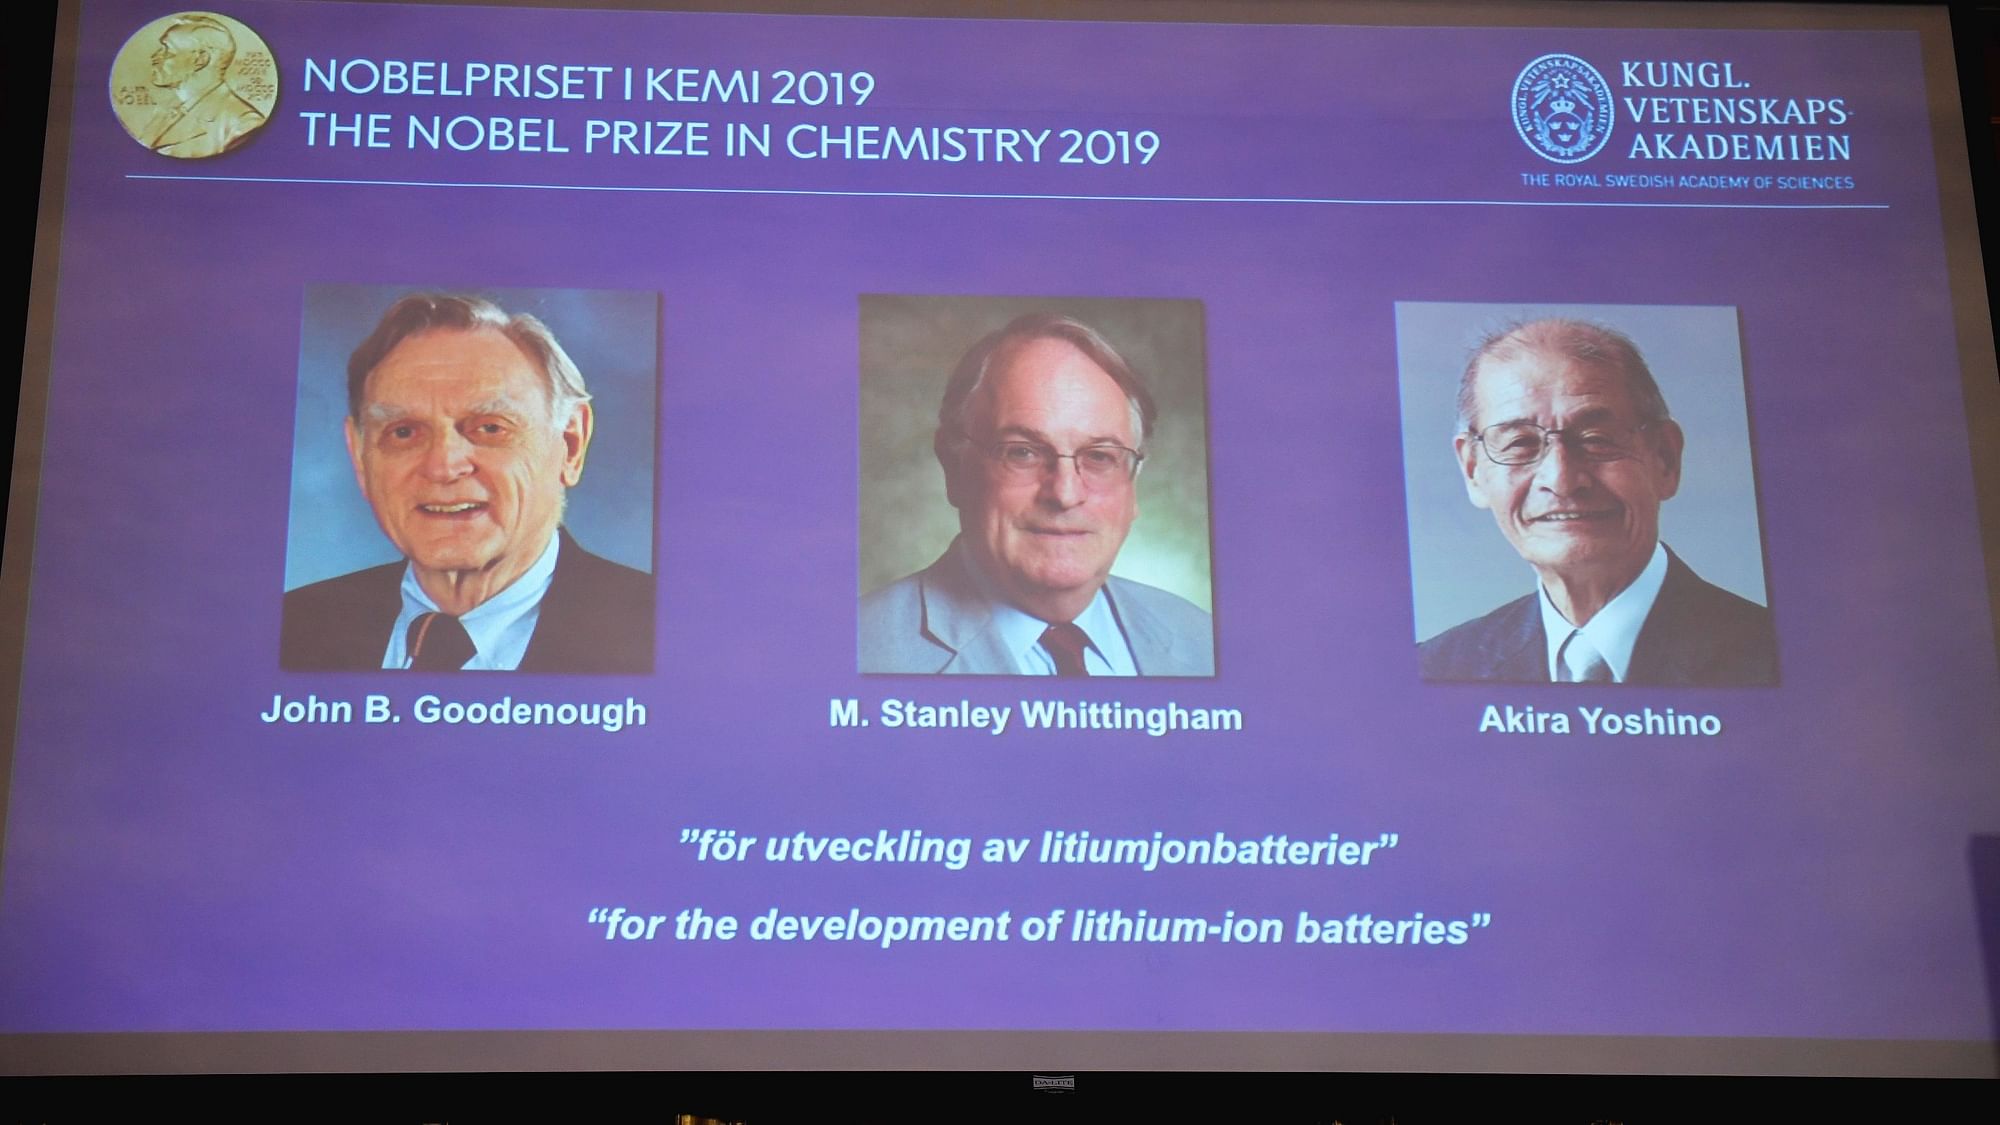 A screen displays the laureates of the 2019 Nobel Prize in Chemistry.